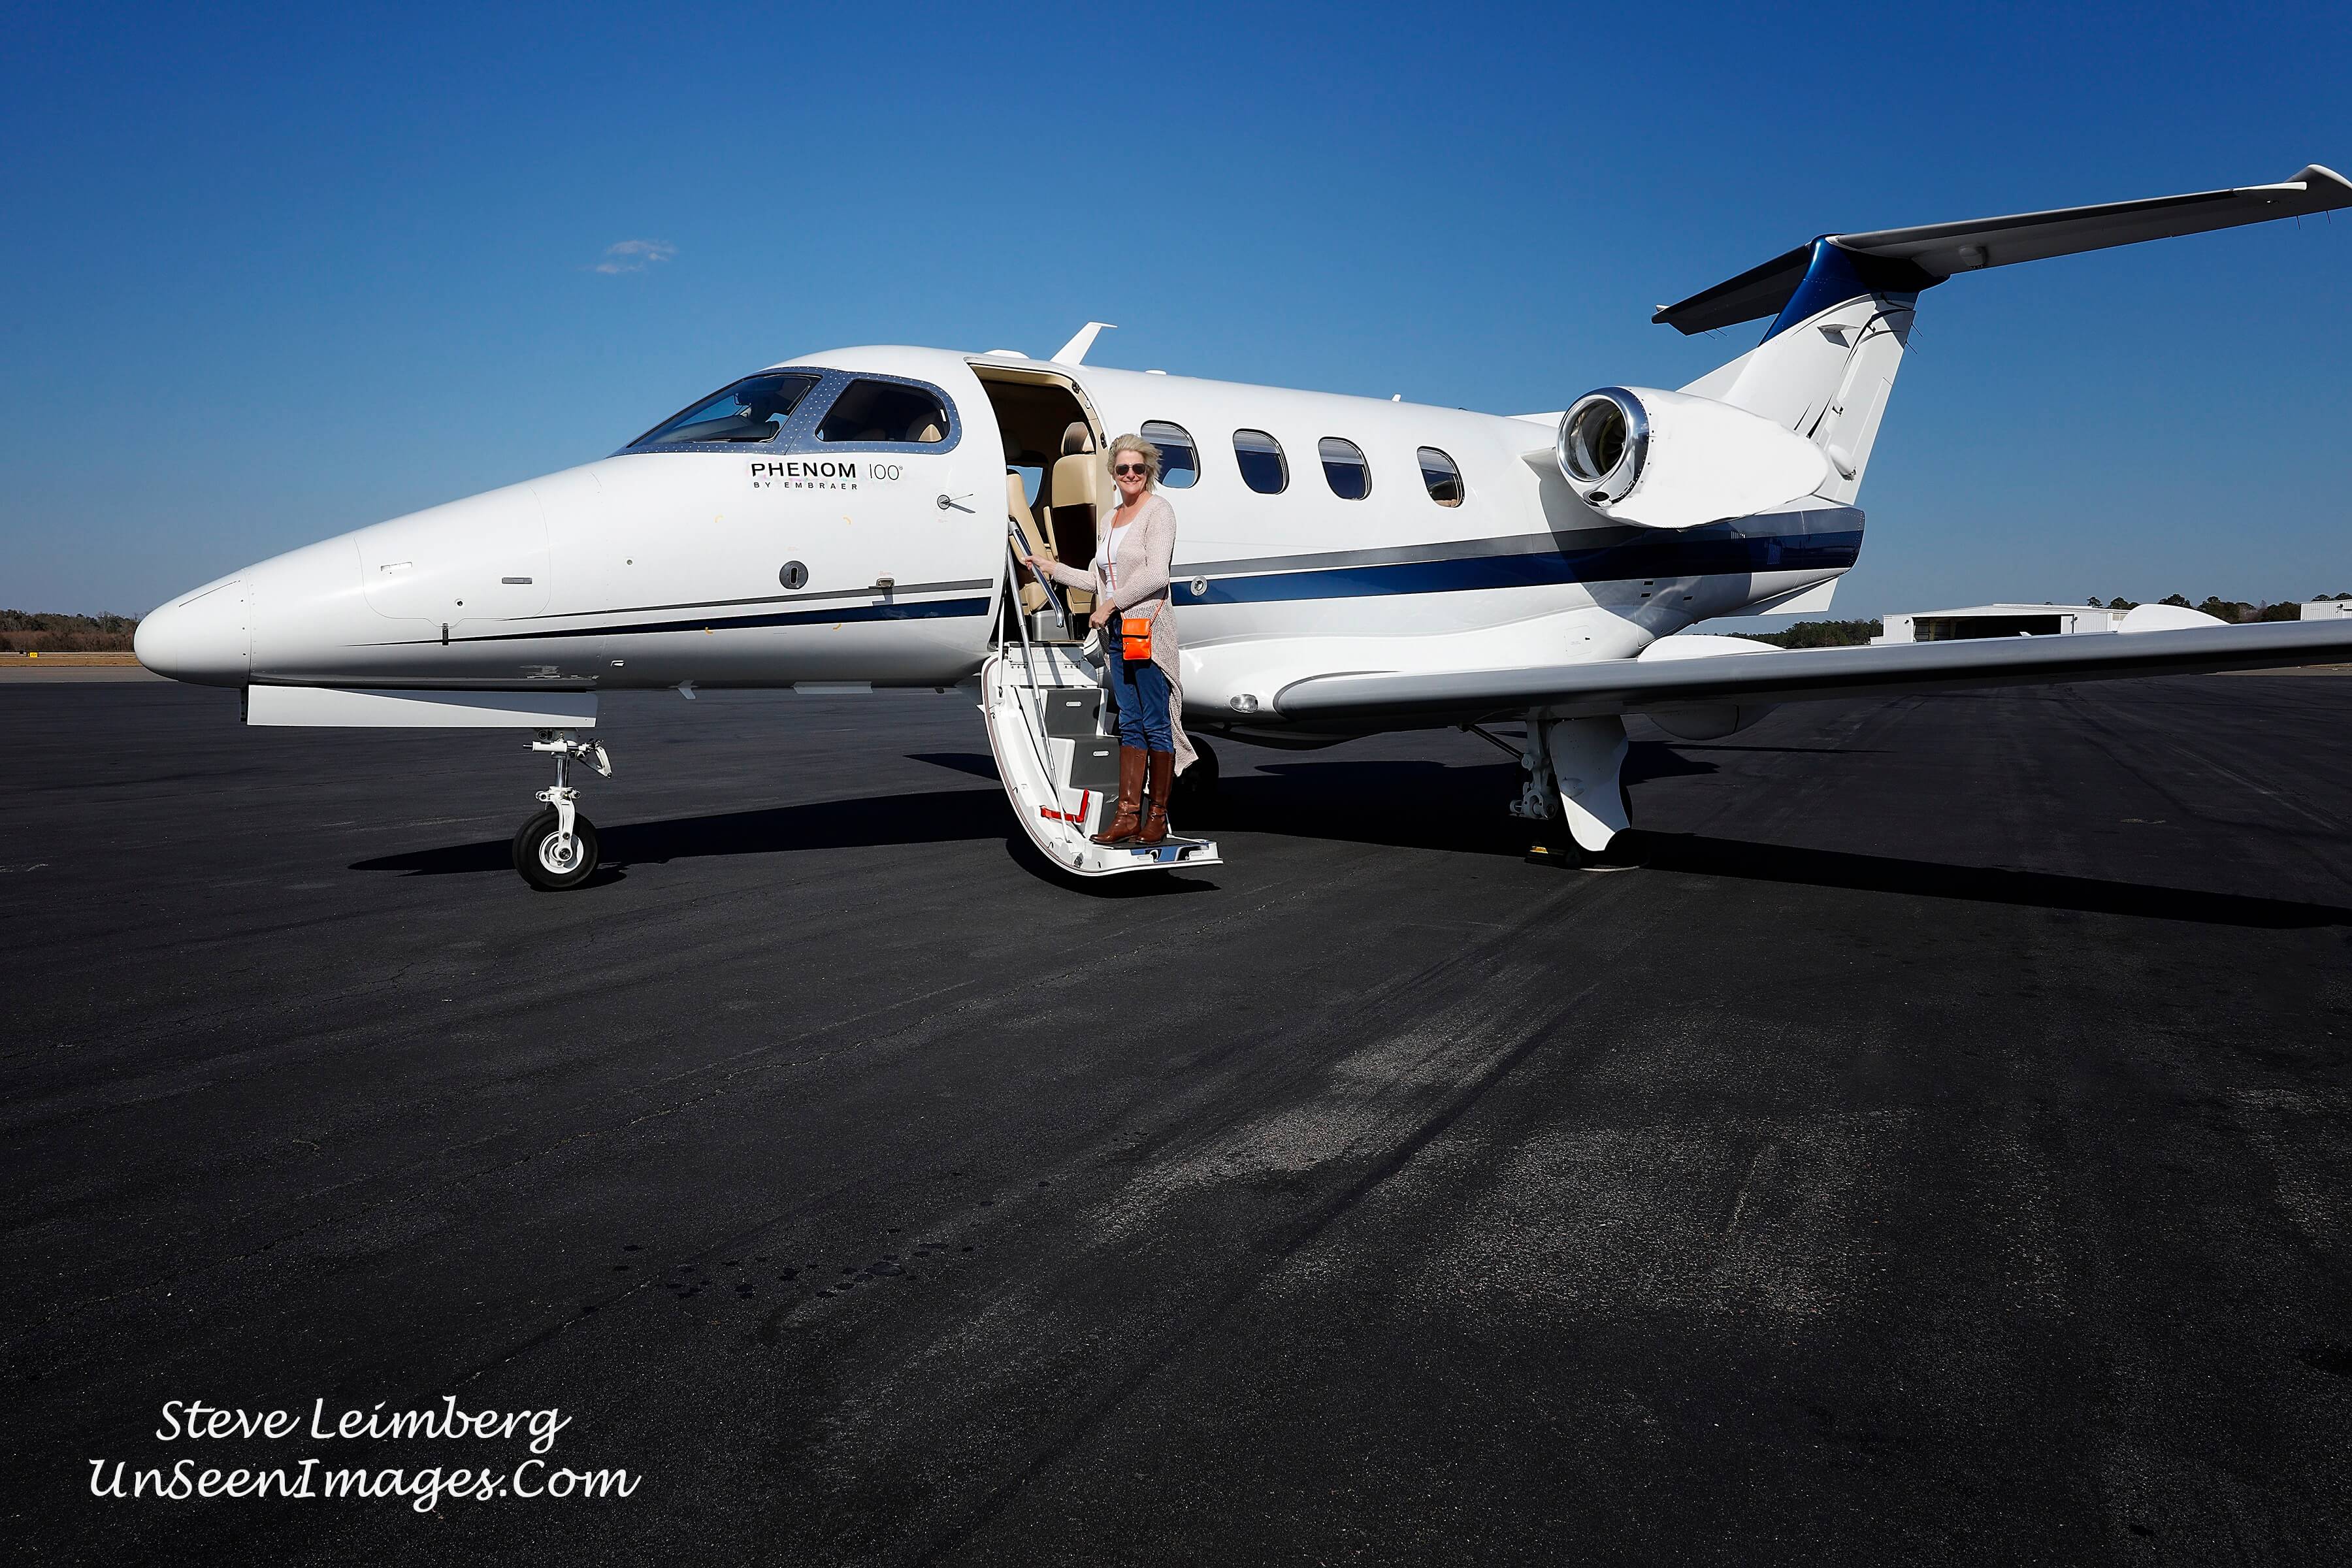 Kathy Miller during a Picnic On The Tarmac photography shoot photo by Steve Leimberg